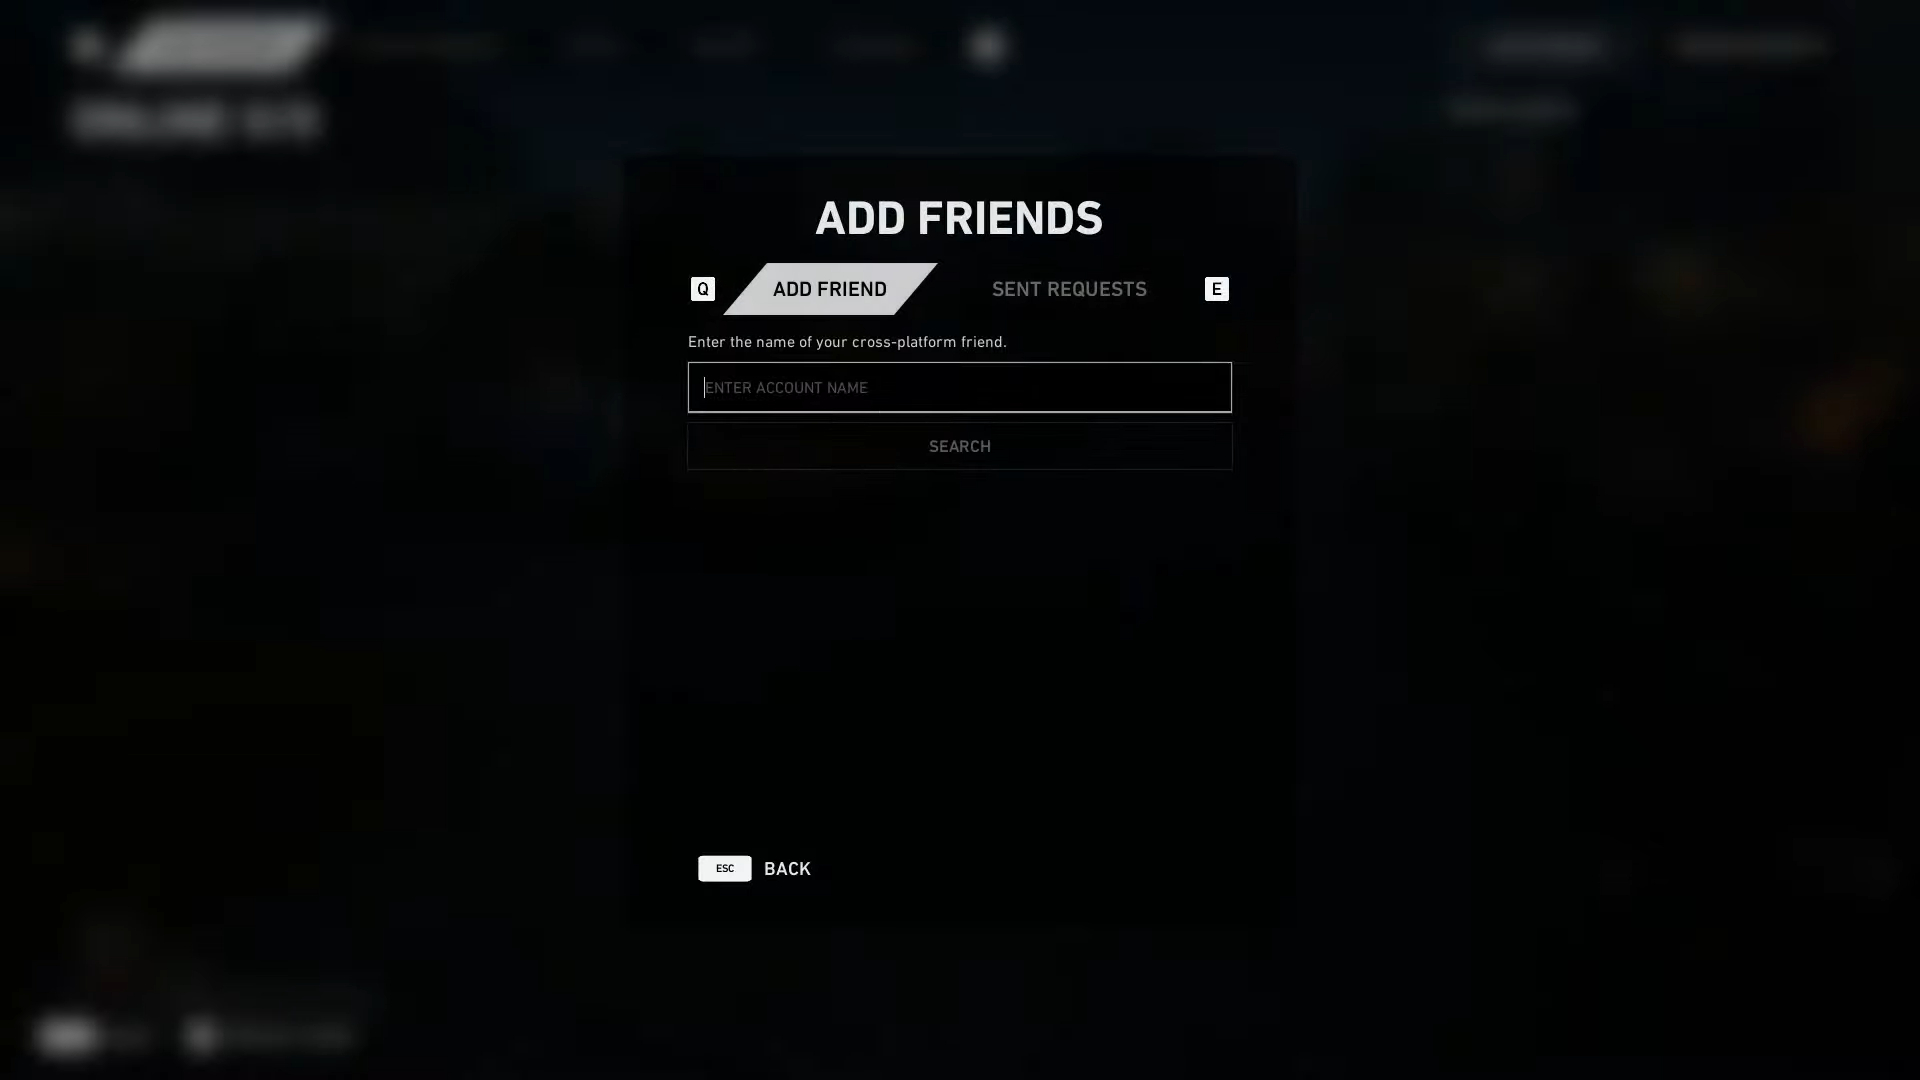 Back 4 Blood crossplay: How to invite friends and create online